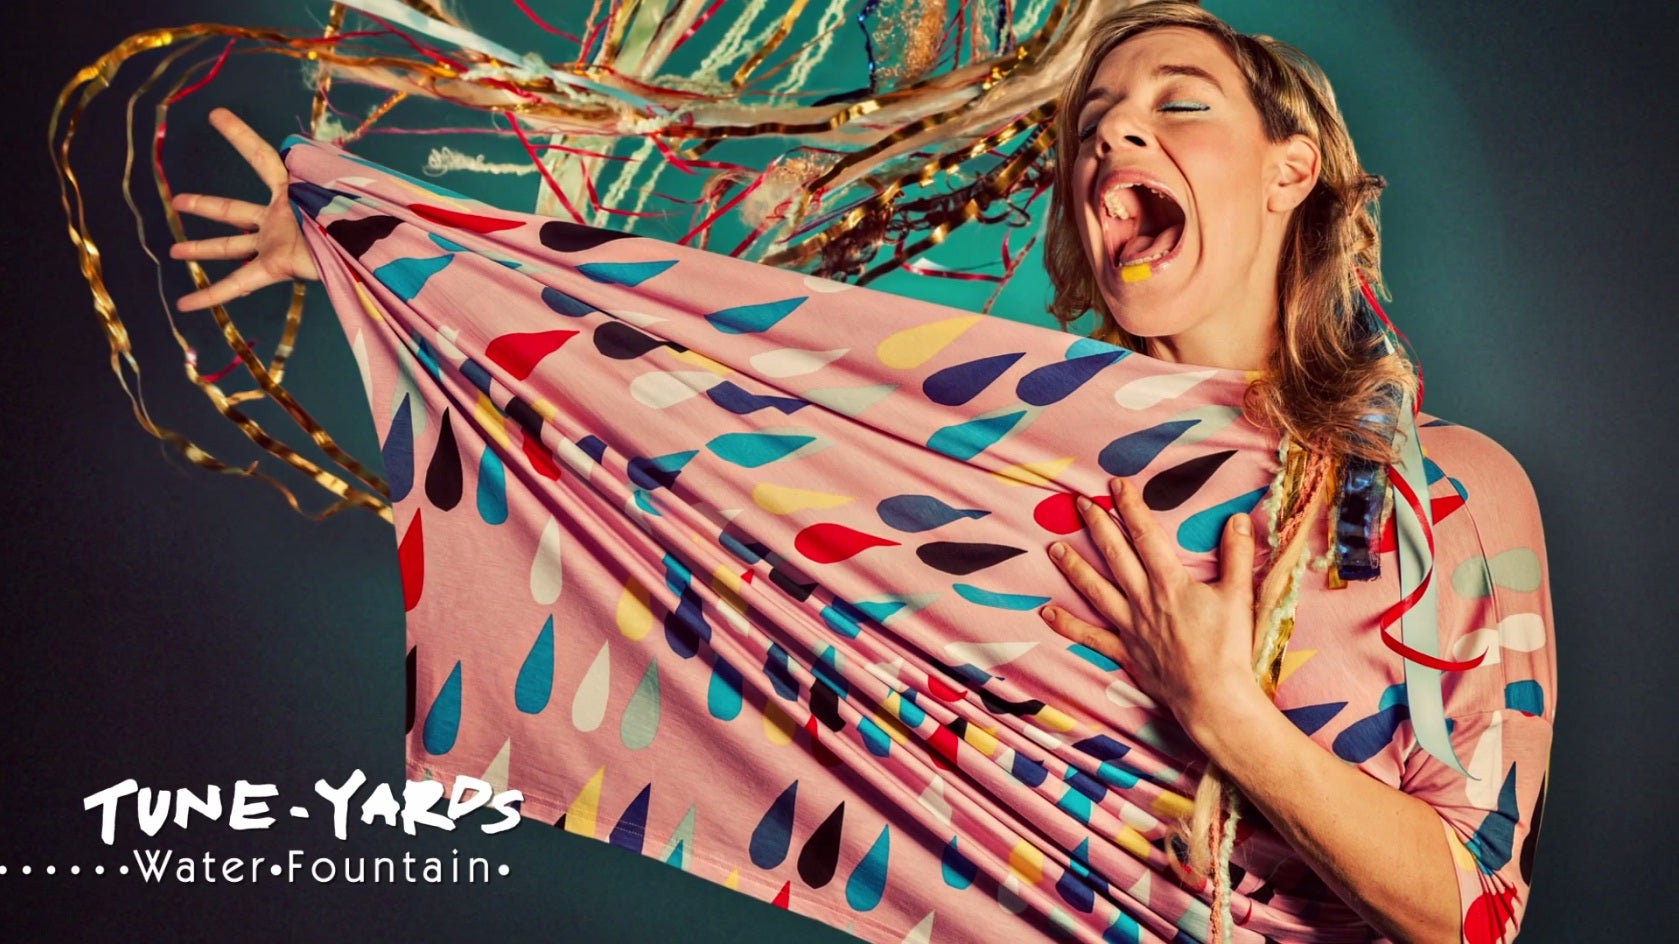 Tune-Yards have made another glorious cacophony